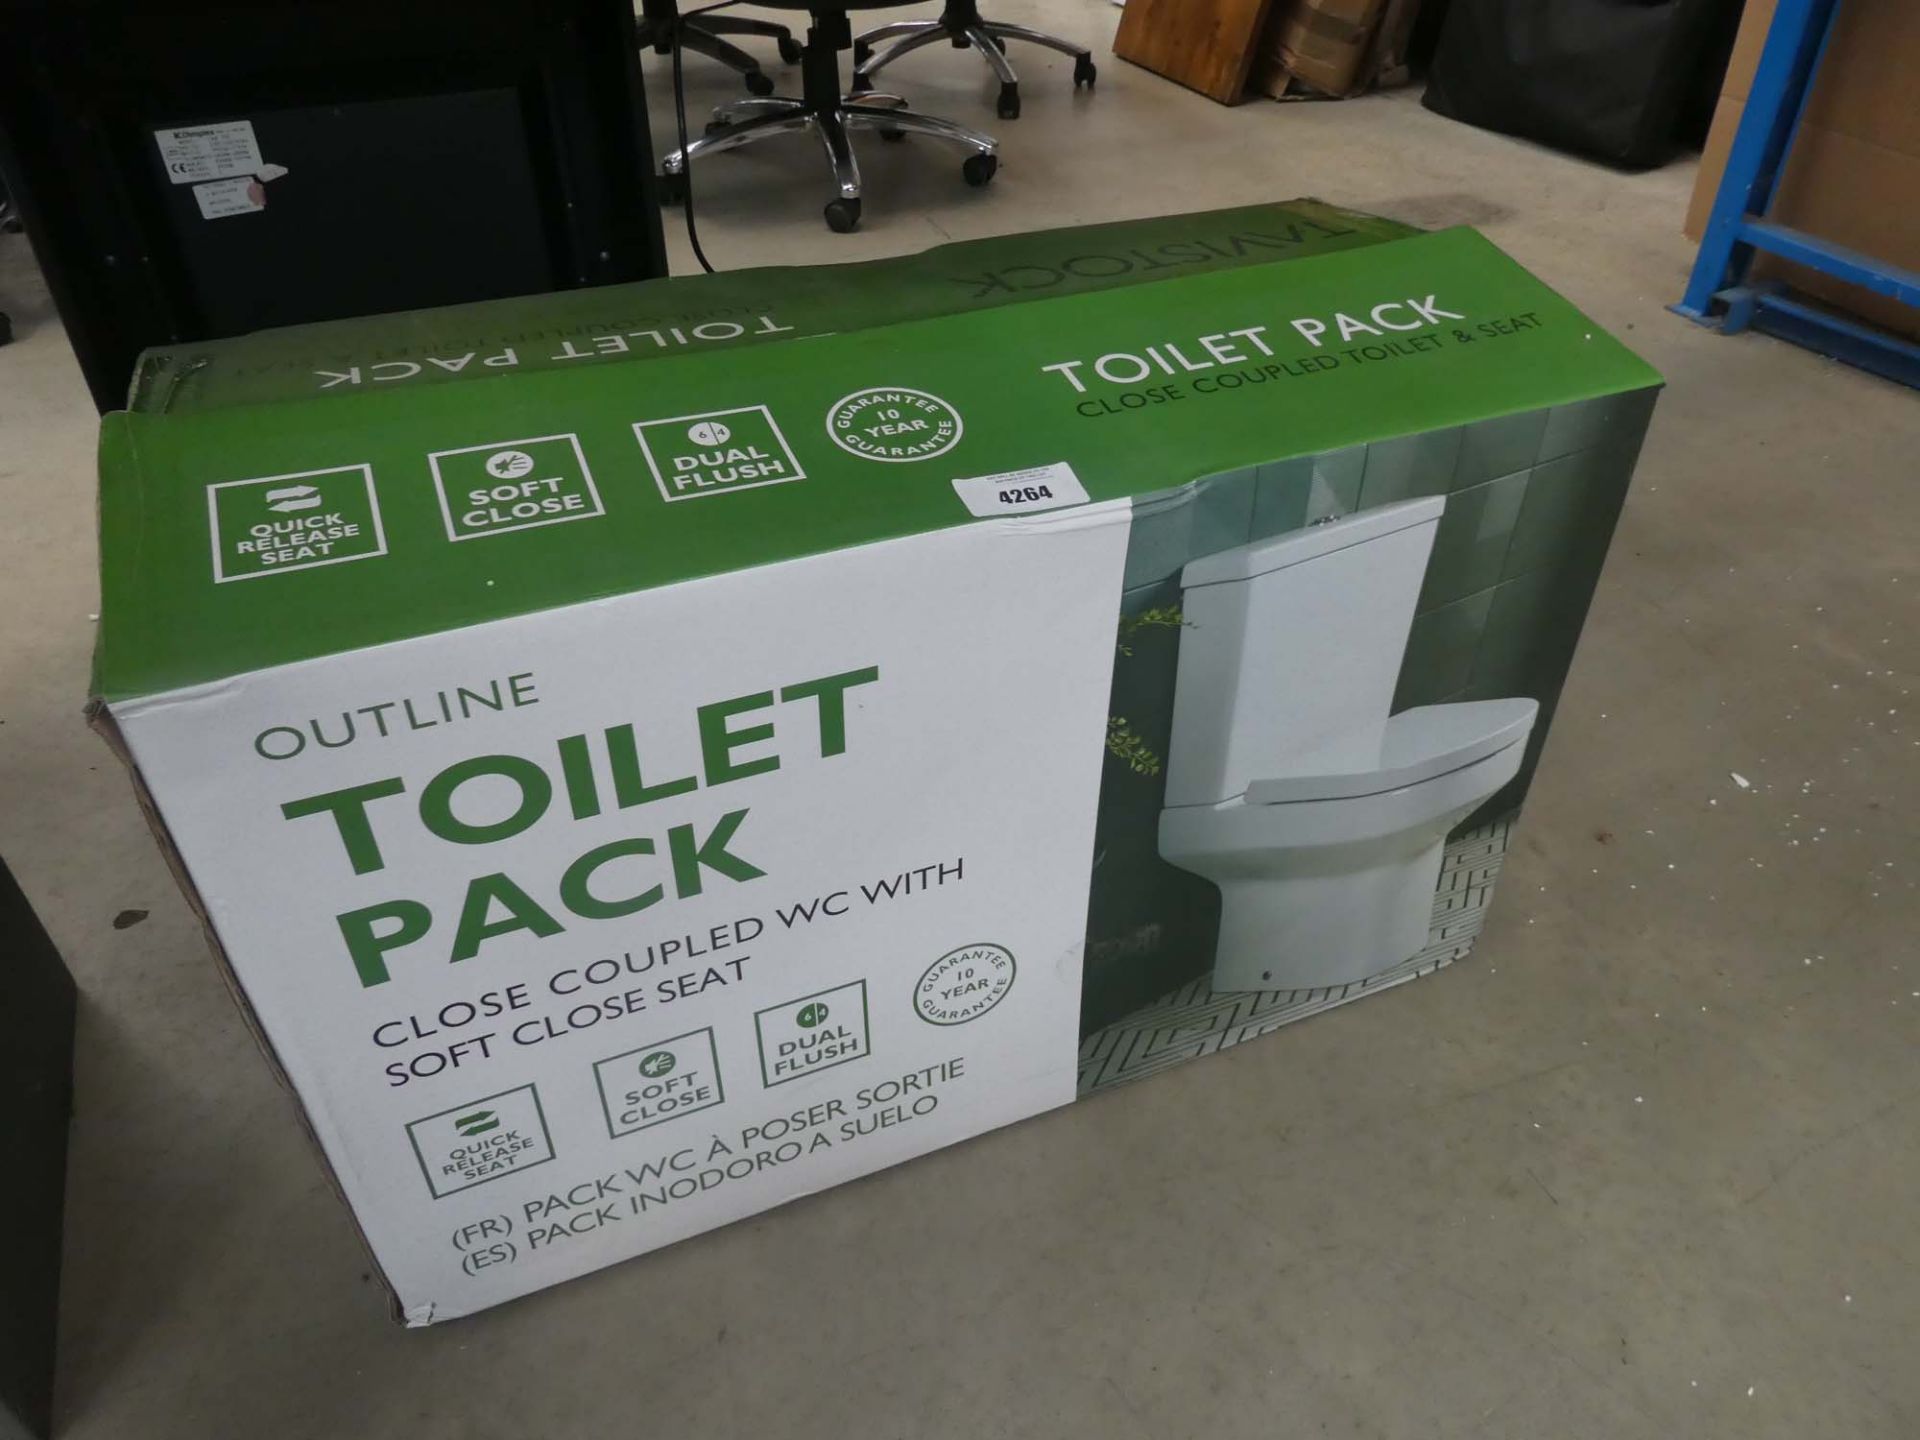 Outline toilet pack with close coupled WC with soft close seat